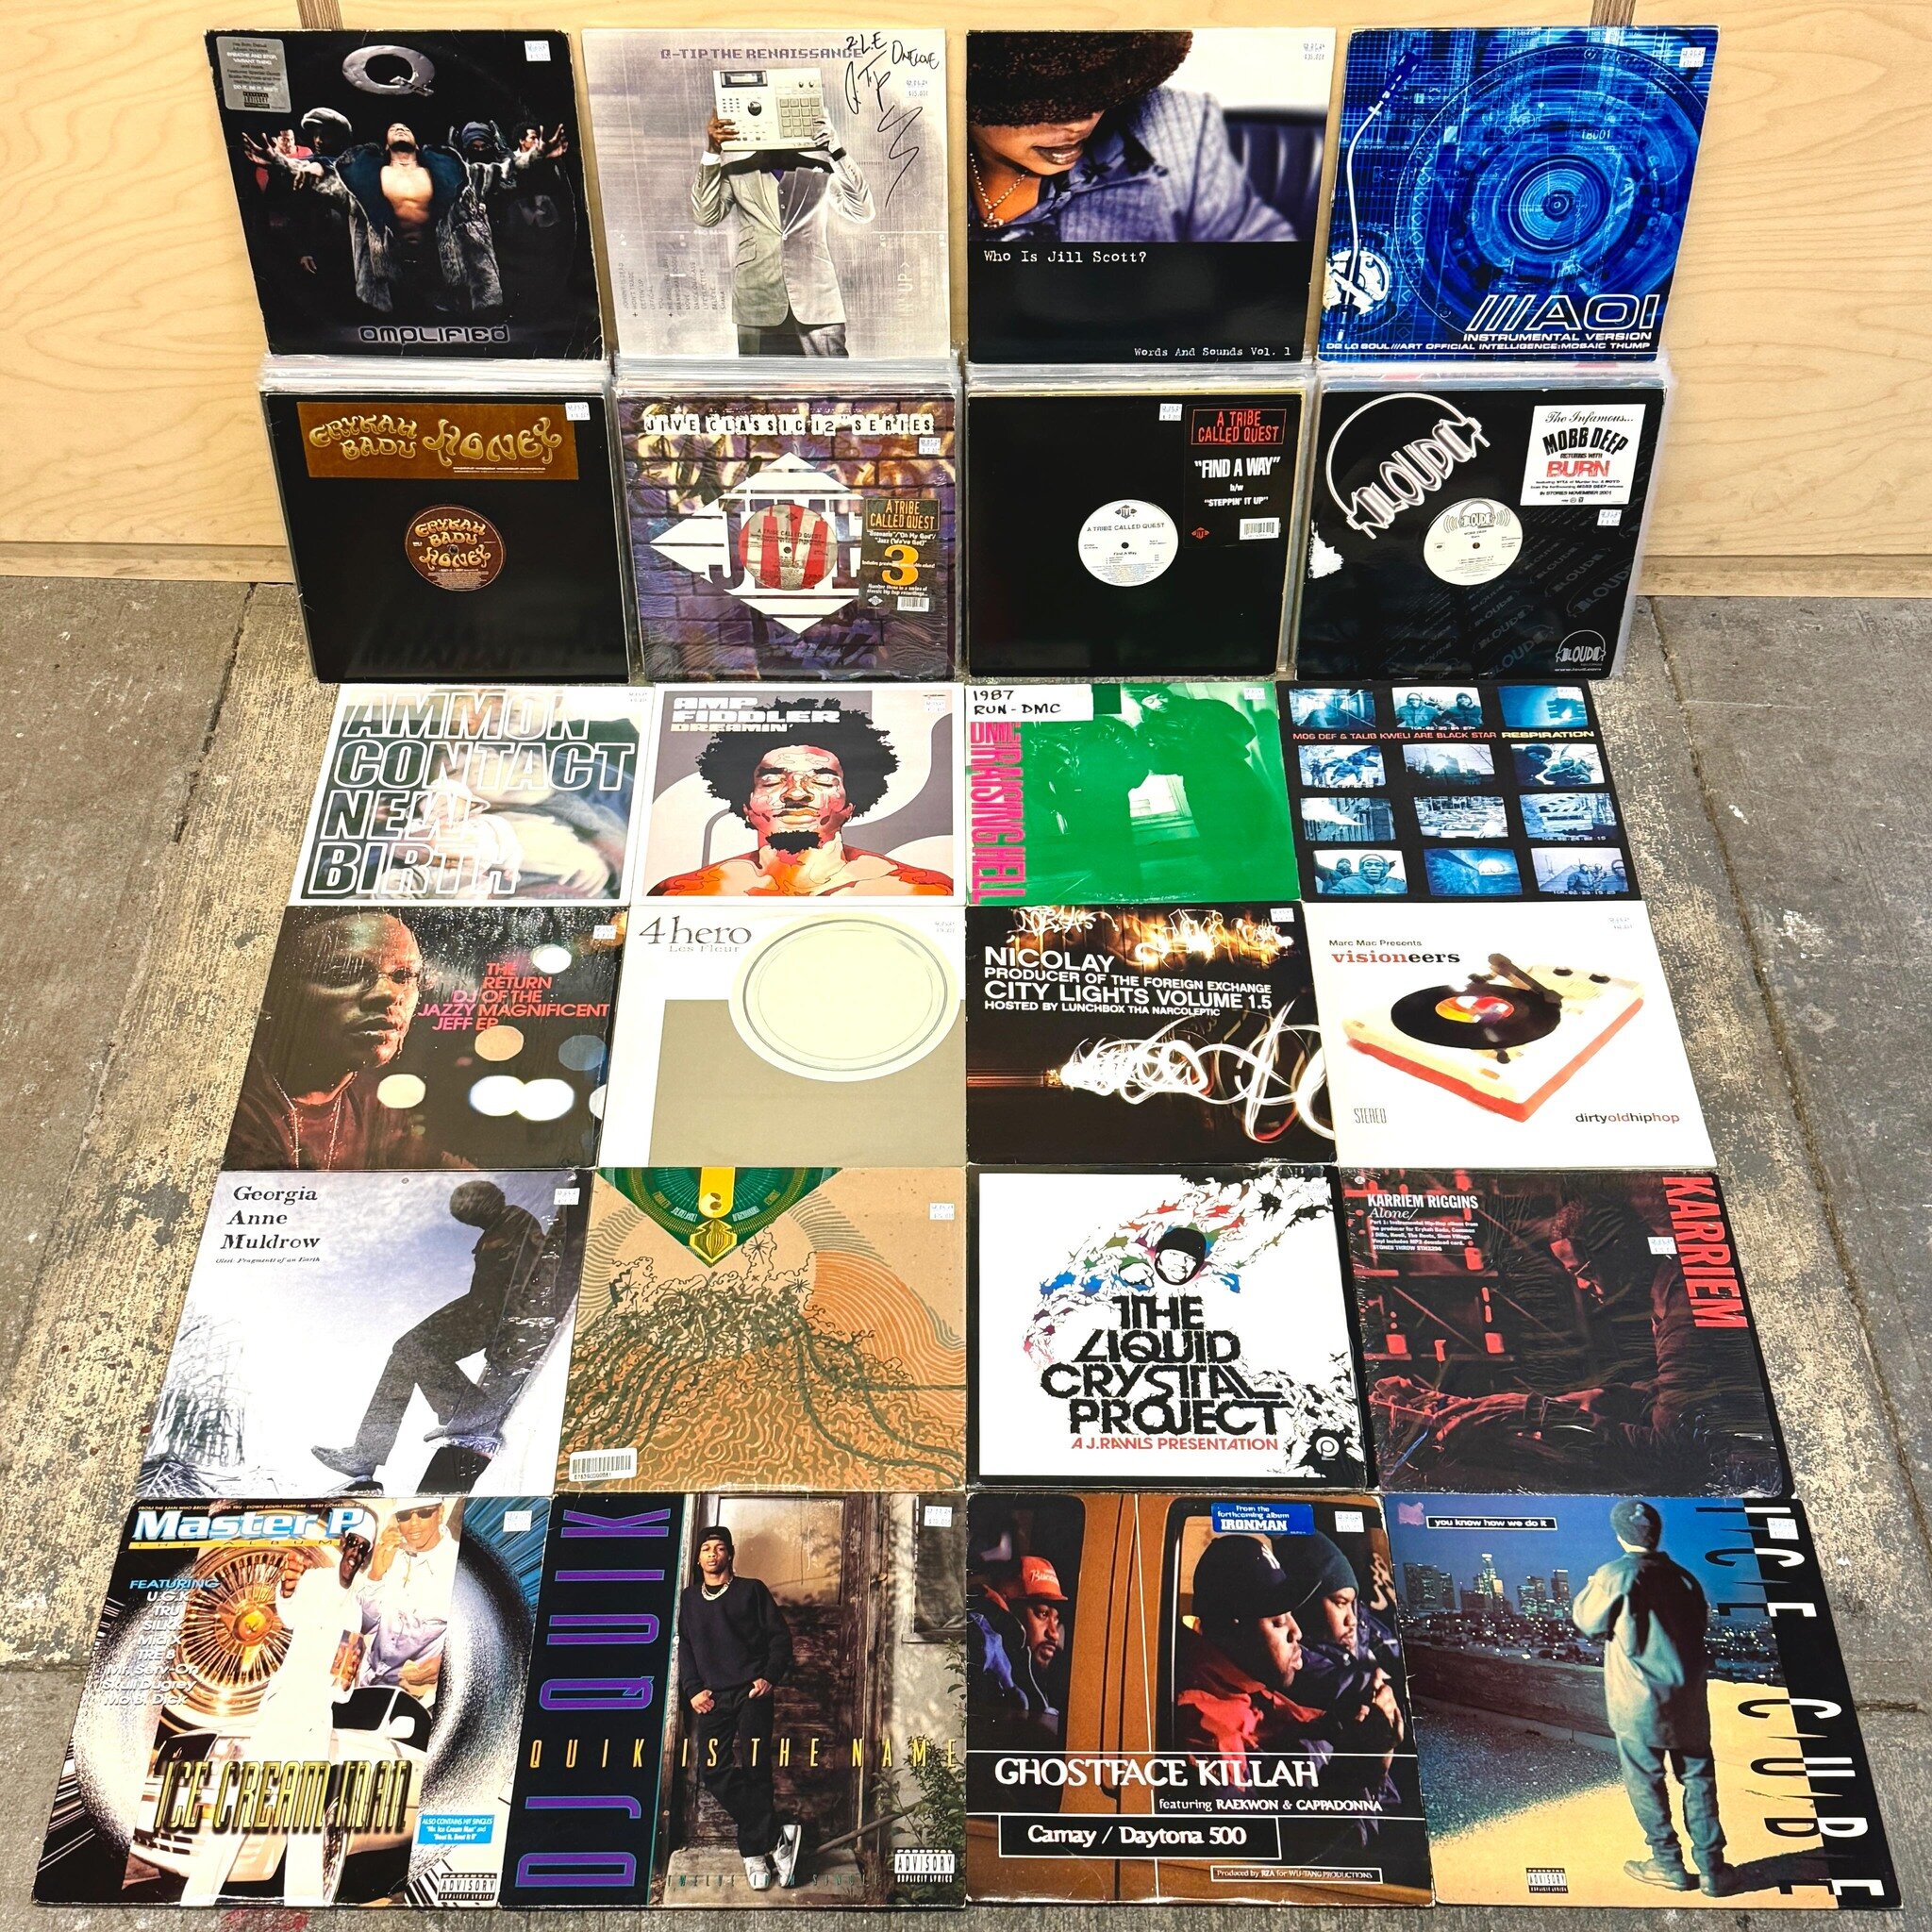 Big batch of Hip-Hop from all eras + regions going out now.
These plus a full crate waiting for you

Rainy days r the best days to go for a dig, so come partake

Here til 8
.
.
.
#ForSaleAtBlueSun #TheOriginalBlueSun #HipHopVinyl